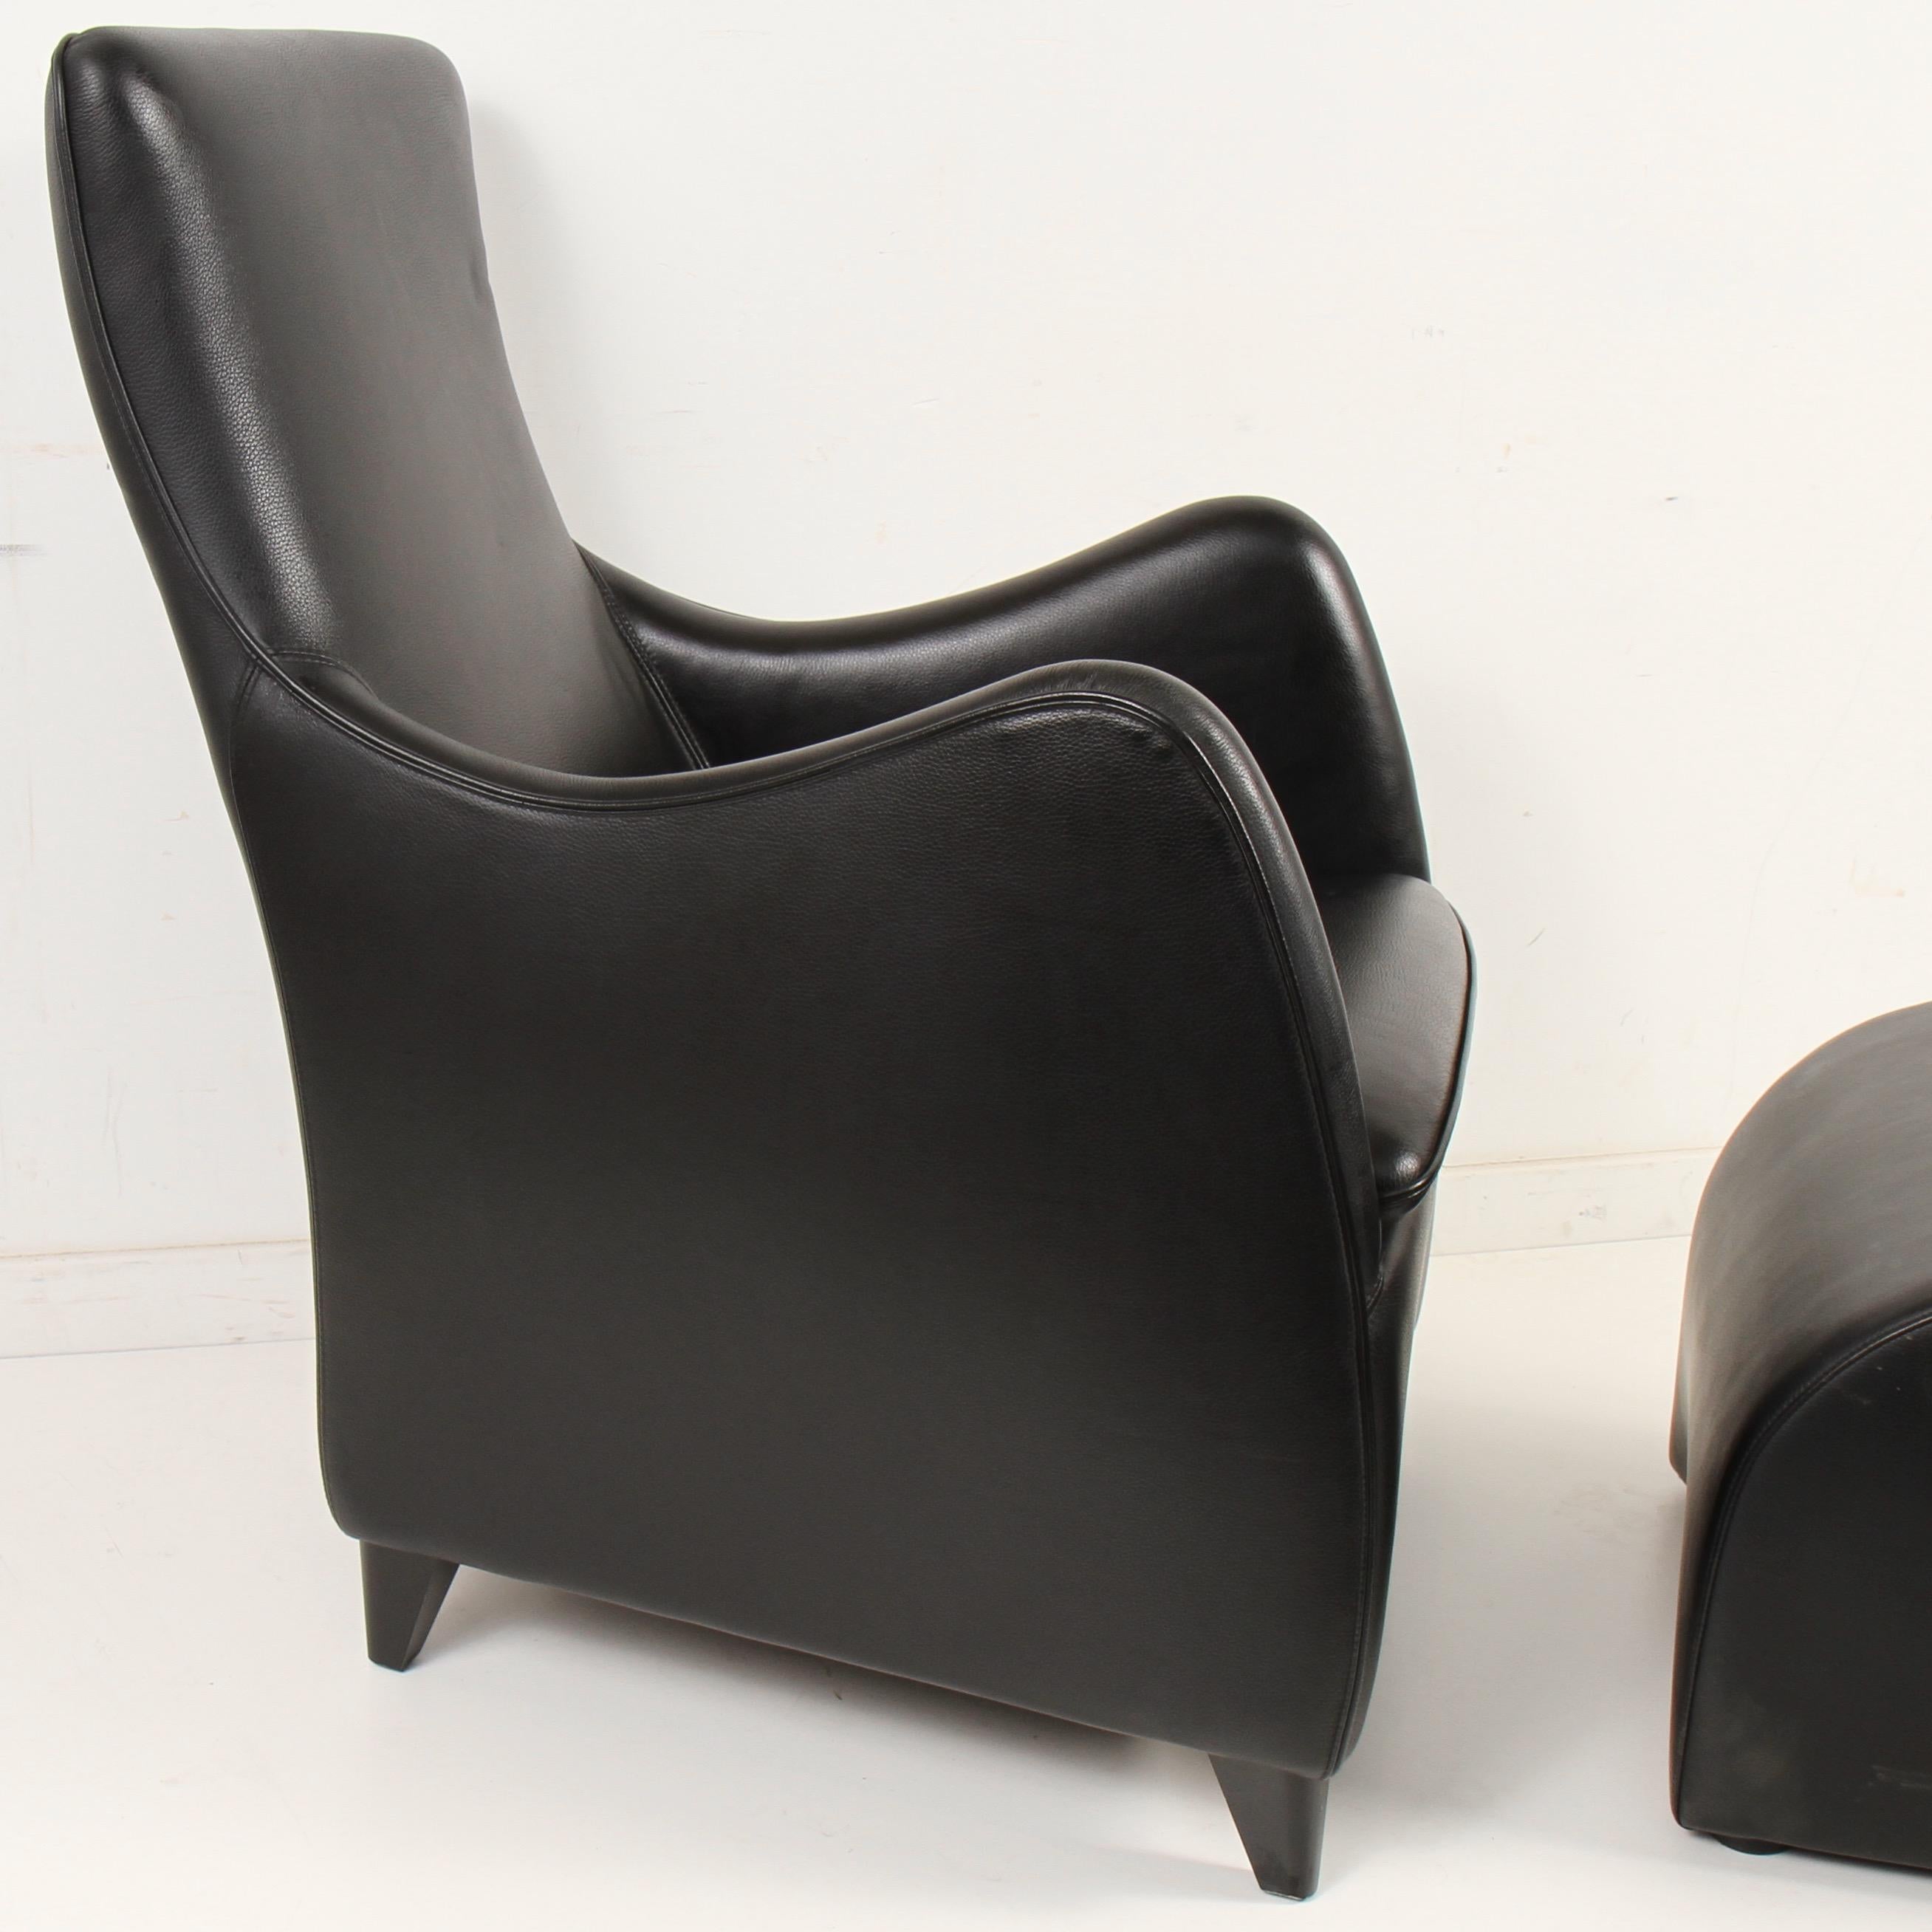 Nice black biomorphic armchair and ottoman by Dutch designer Gerard Van Den Berg for Austria's premier leather furniture maker Wittman. Had it not been for designer Gerard van den Berg, Dutch design might not be all that it is today. Taking a